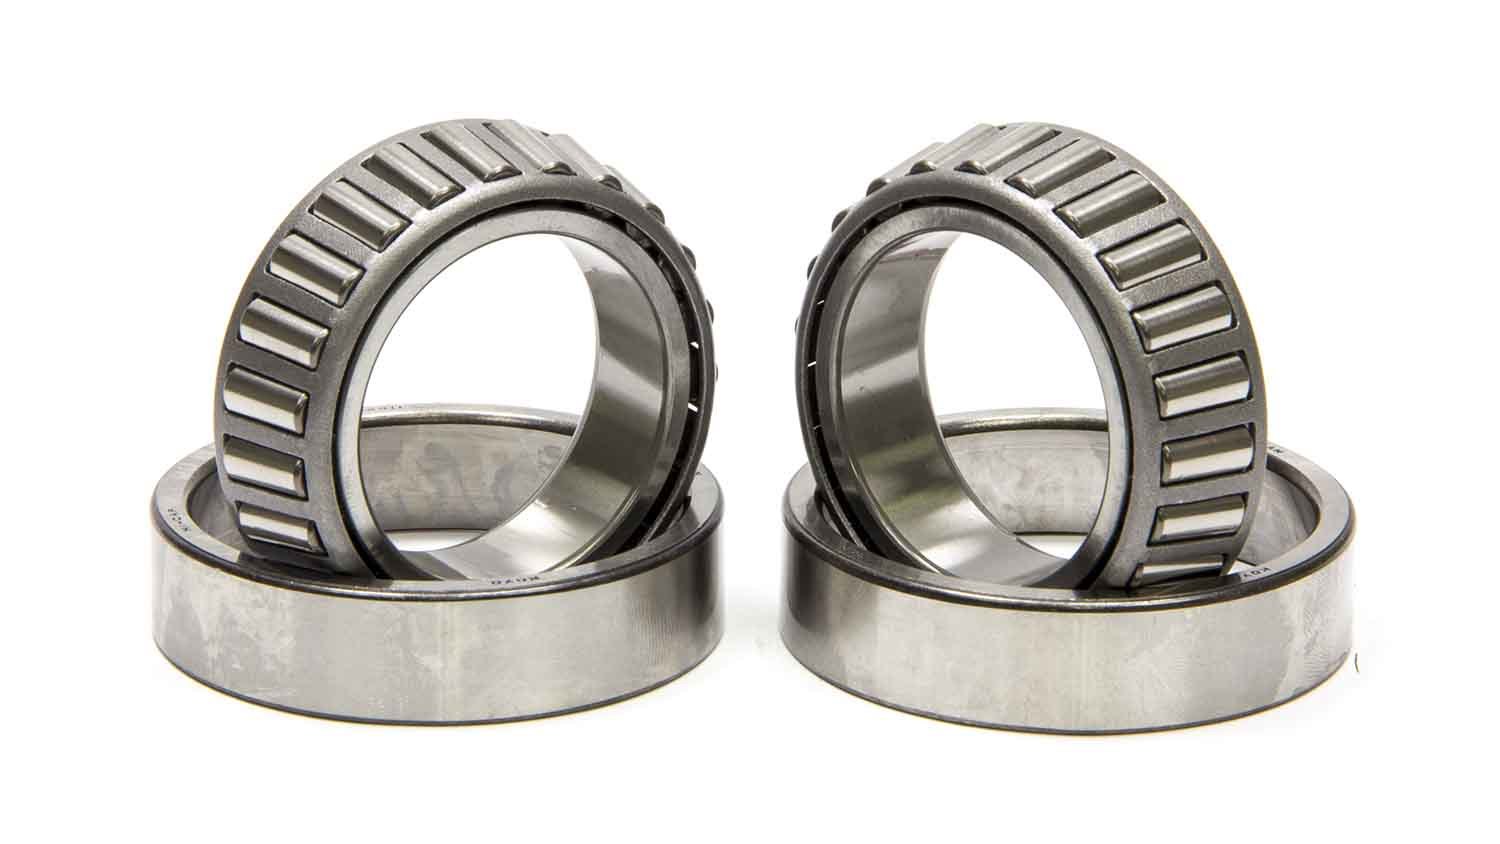 Ratech 9024 - Carrier Bearing, Roller Bearing, Races, Steel, 7.75 / 8.5 in, GM 9-Bolt, Pair